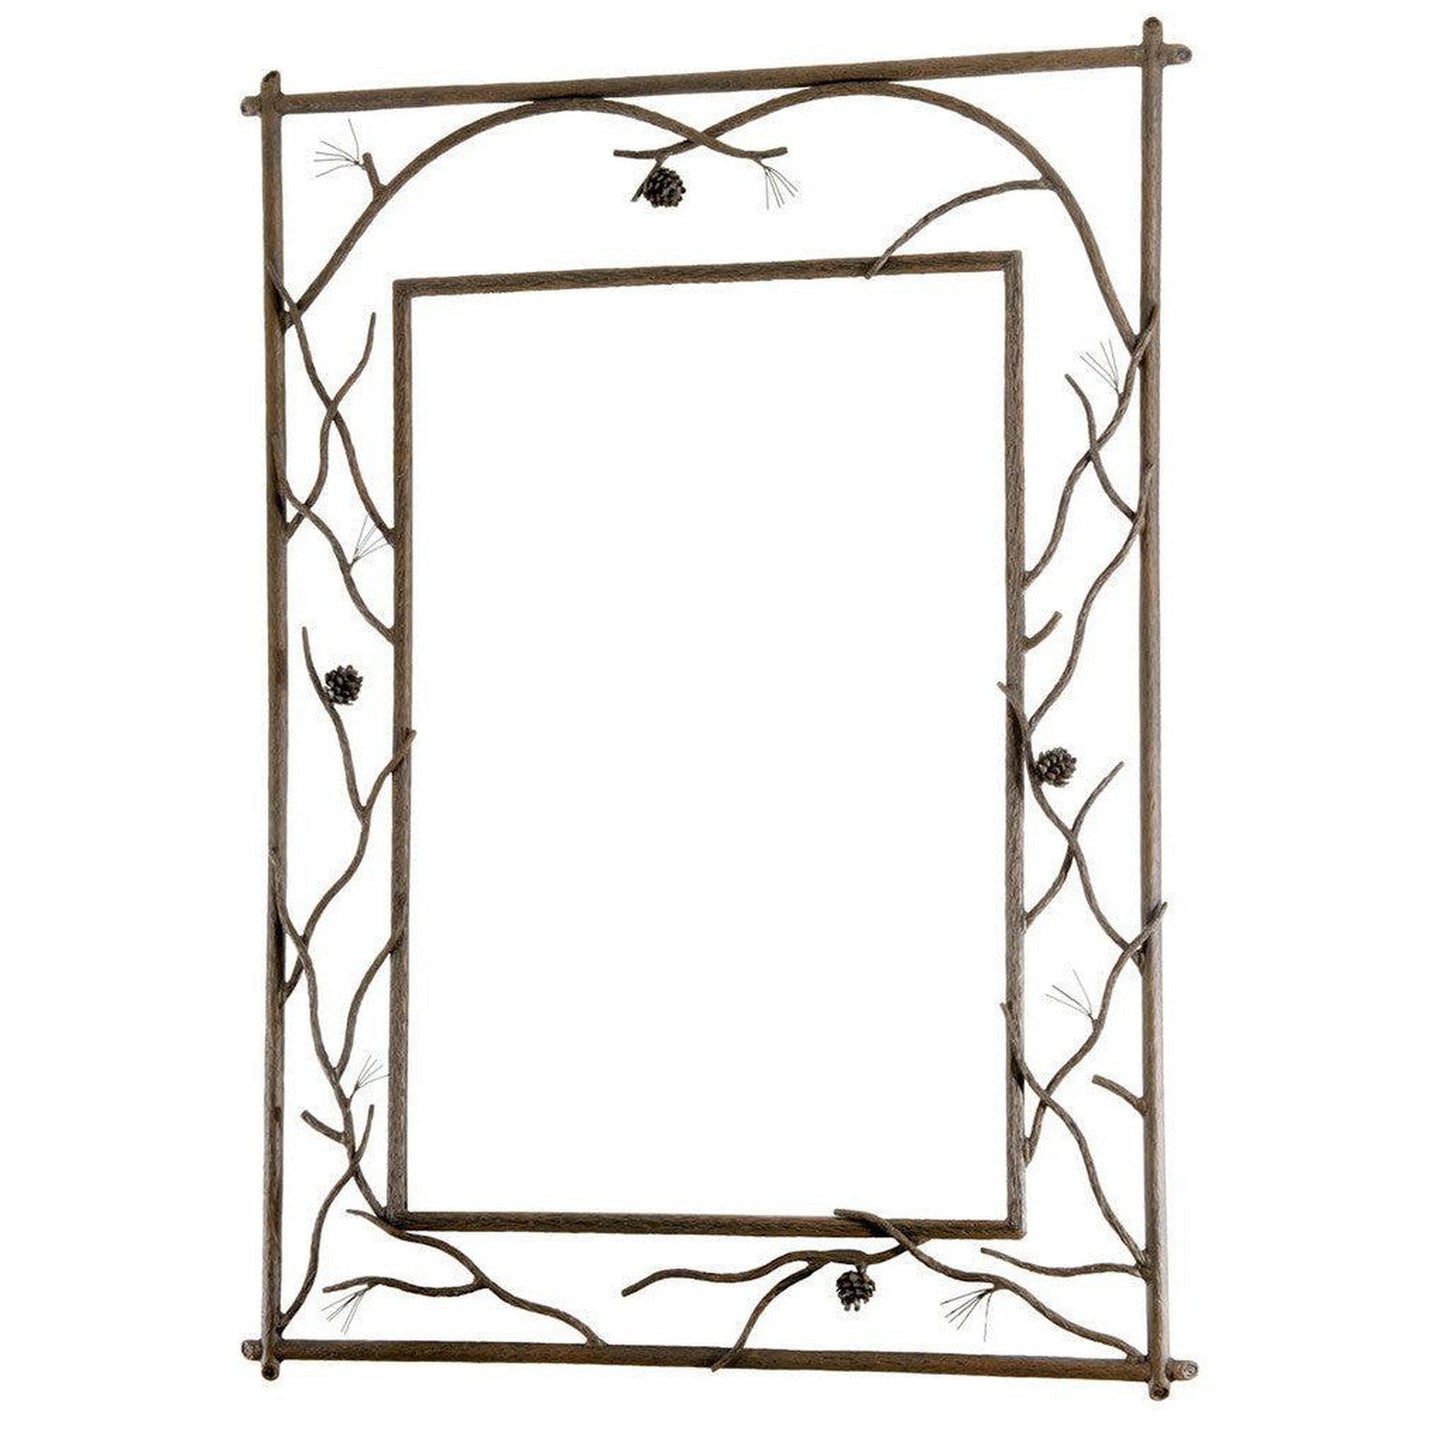 Stone County Ironworks Pine 37" x 51" Large Woodland Brown Branched Iron Wall Mirror With Copper Iron Accent